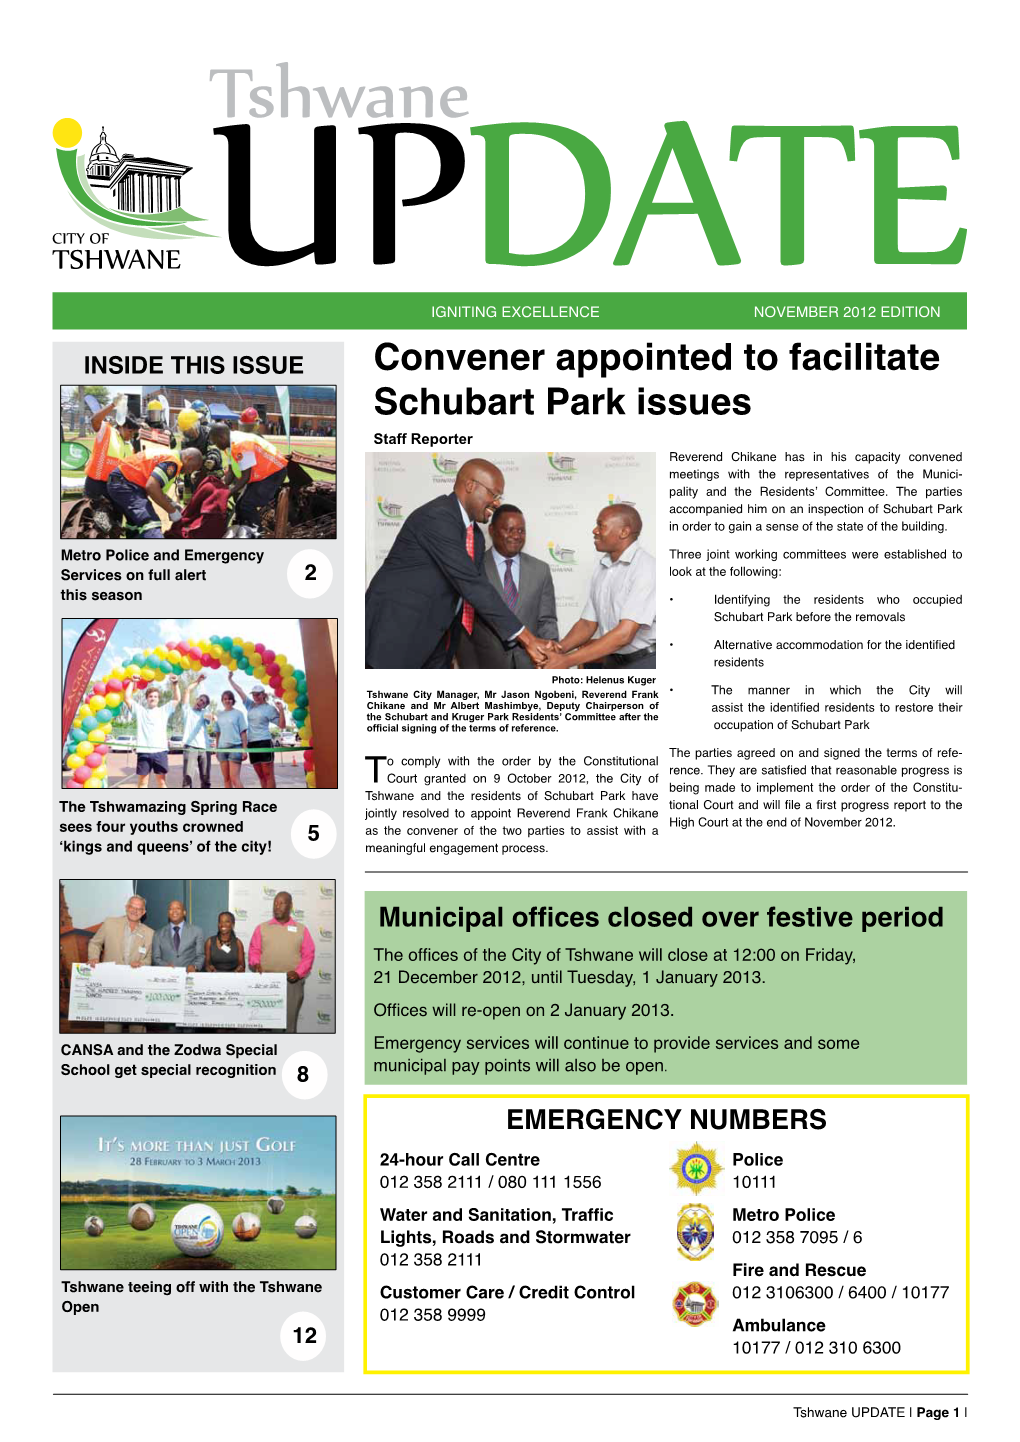 Convener Appointed to Facilitate Schubart Park Issues